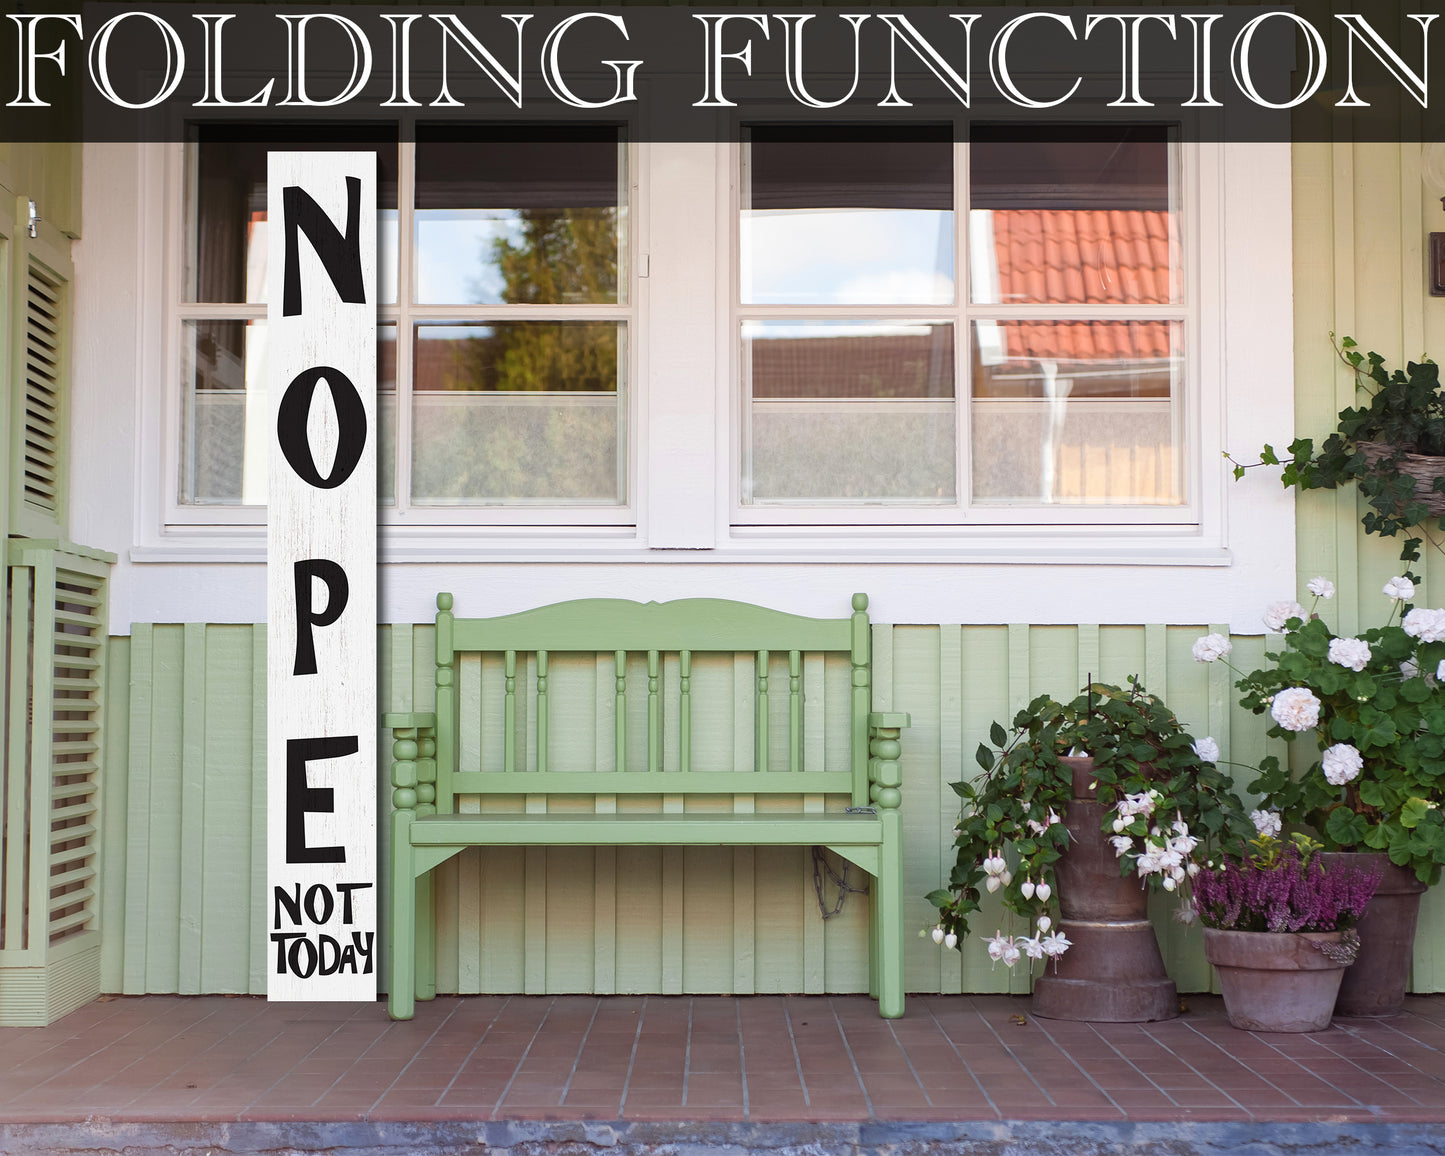 72-Inch Wooden "Nope, Not Today" Porch Sign for Front Door, White Standing Porch Sign with Foldable Design